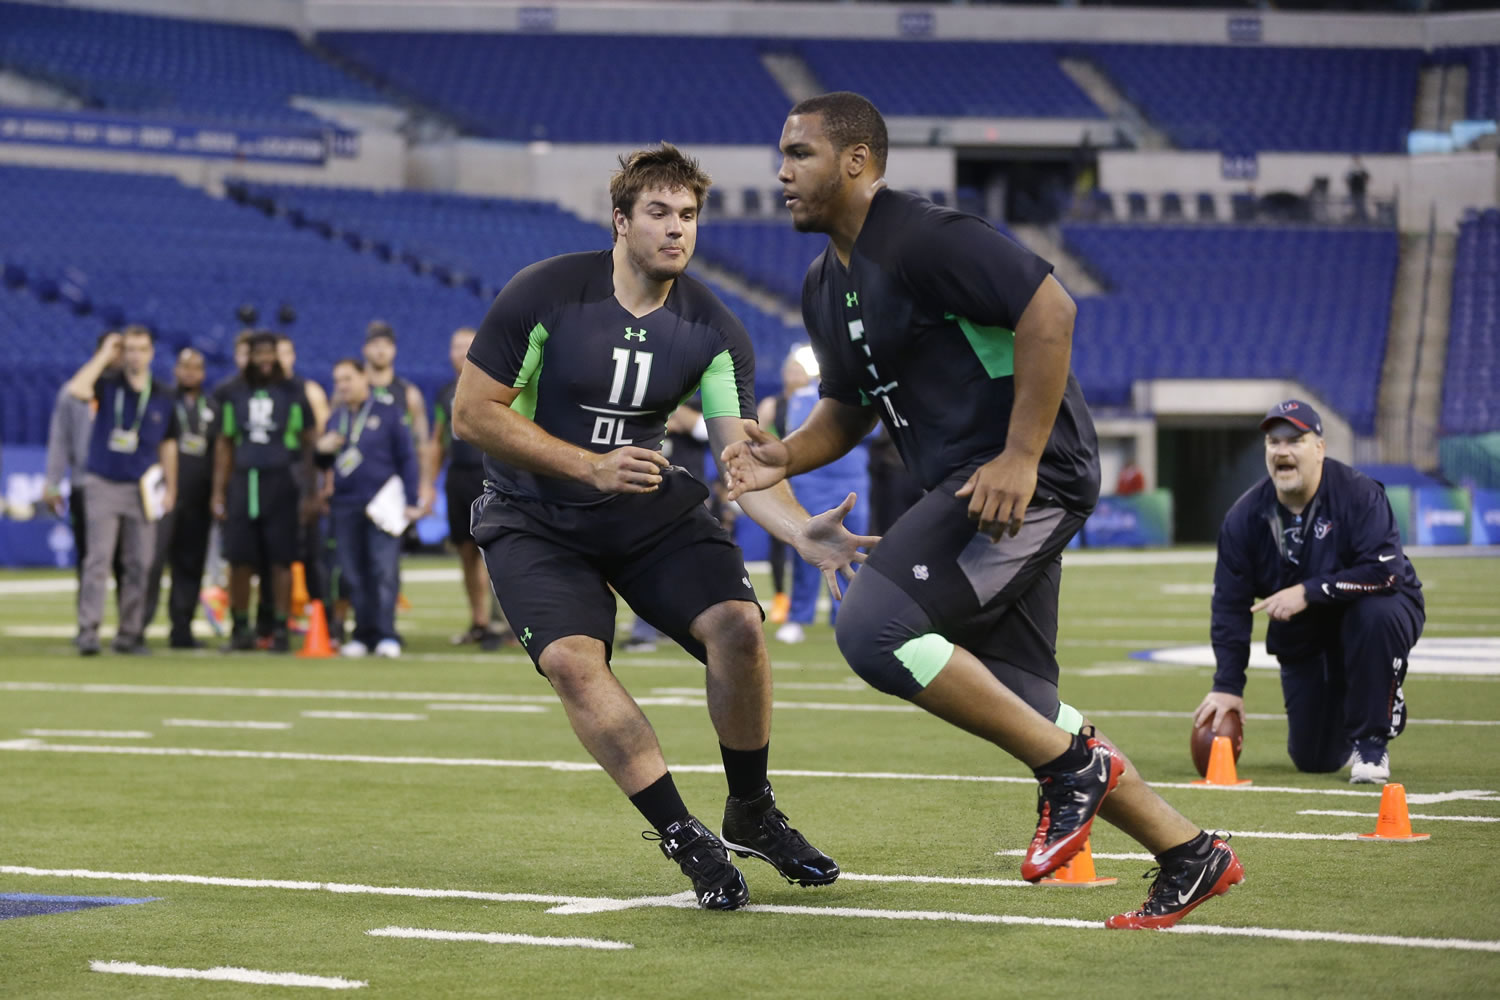 Michigan State offensive lineman Jack Conklin, left, blocks Western Michigan offensive lineman Willie Beavers during a drill at the NFL football scouting combine in Indianapolis, Friday, Feb. 26, 2016.